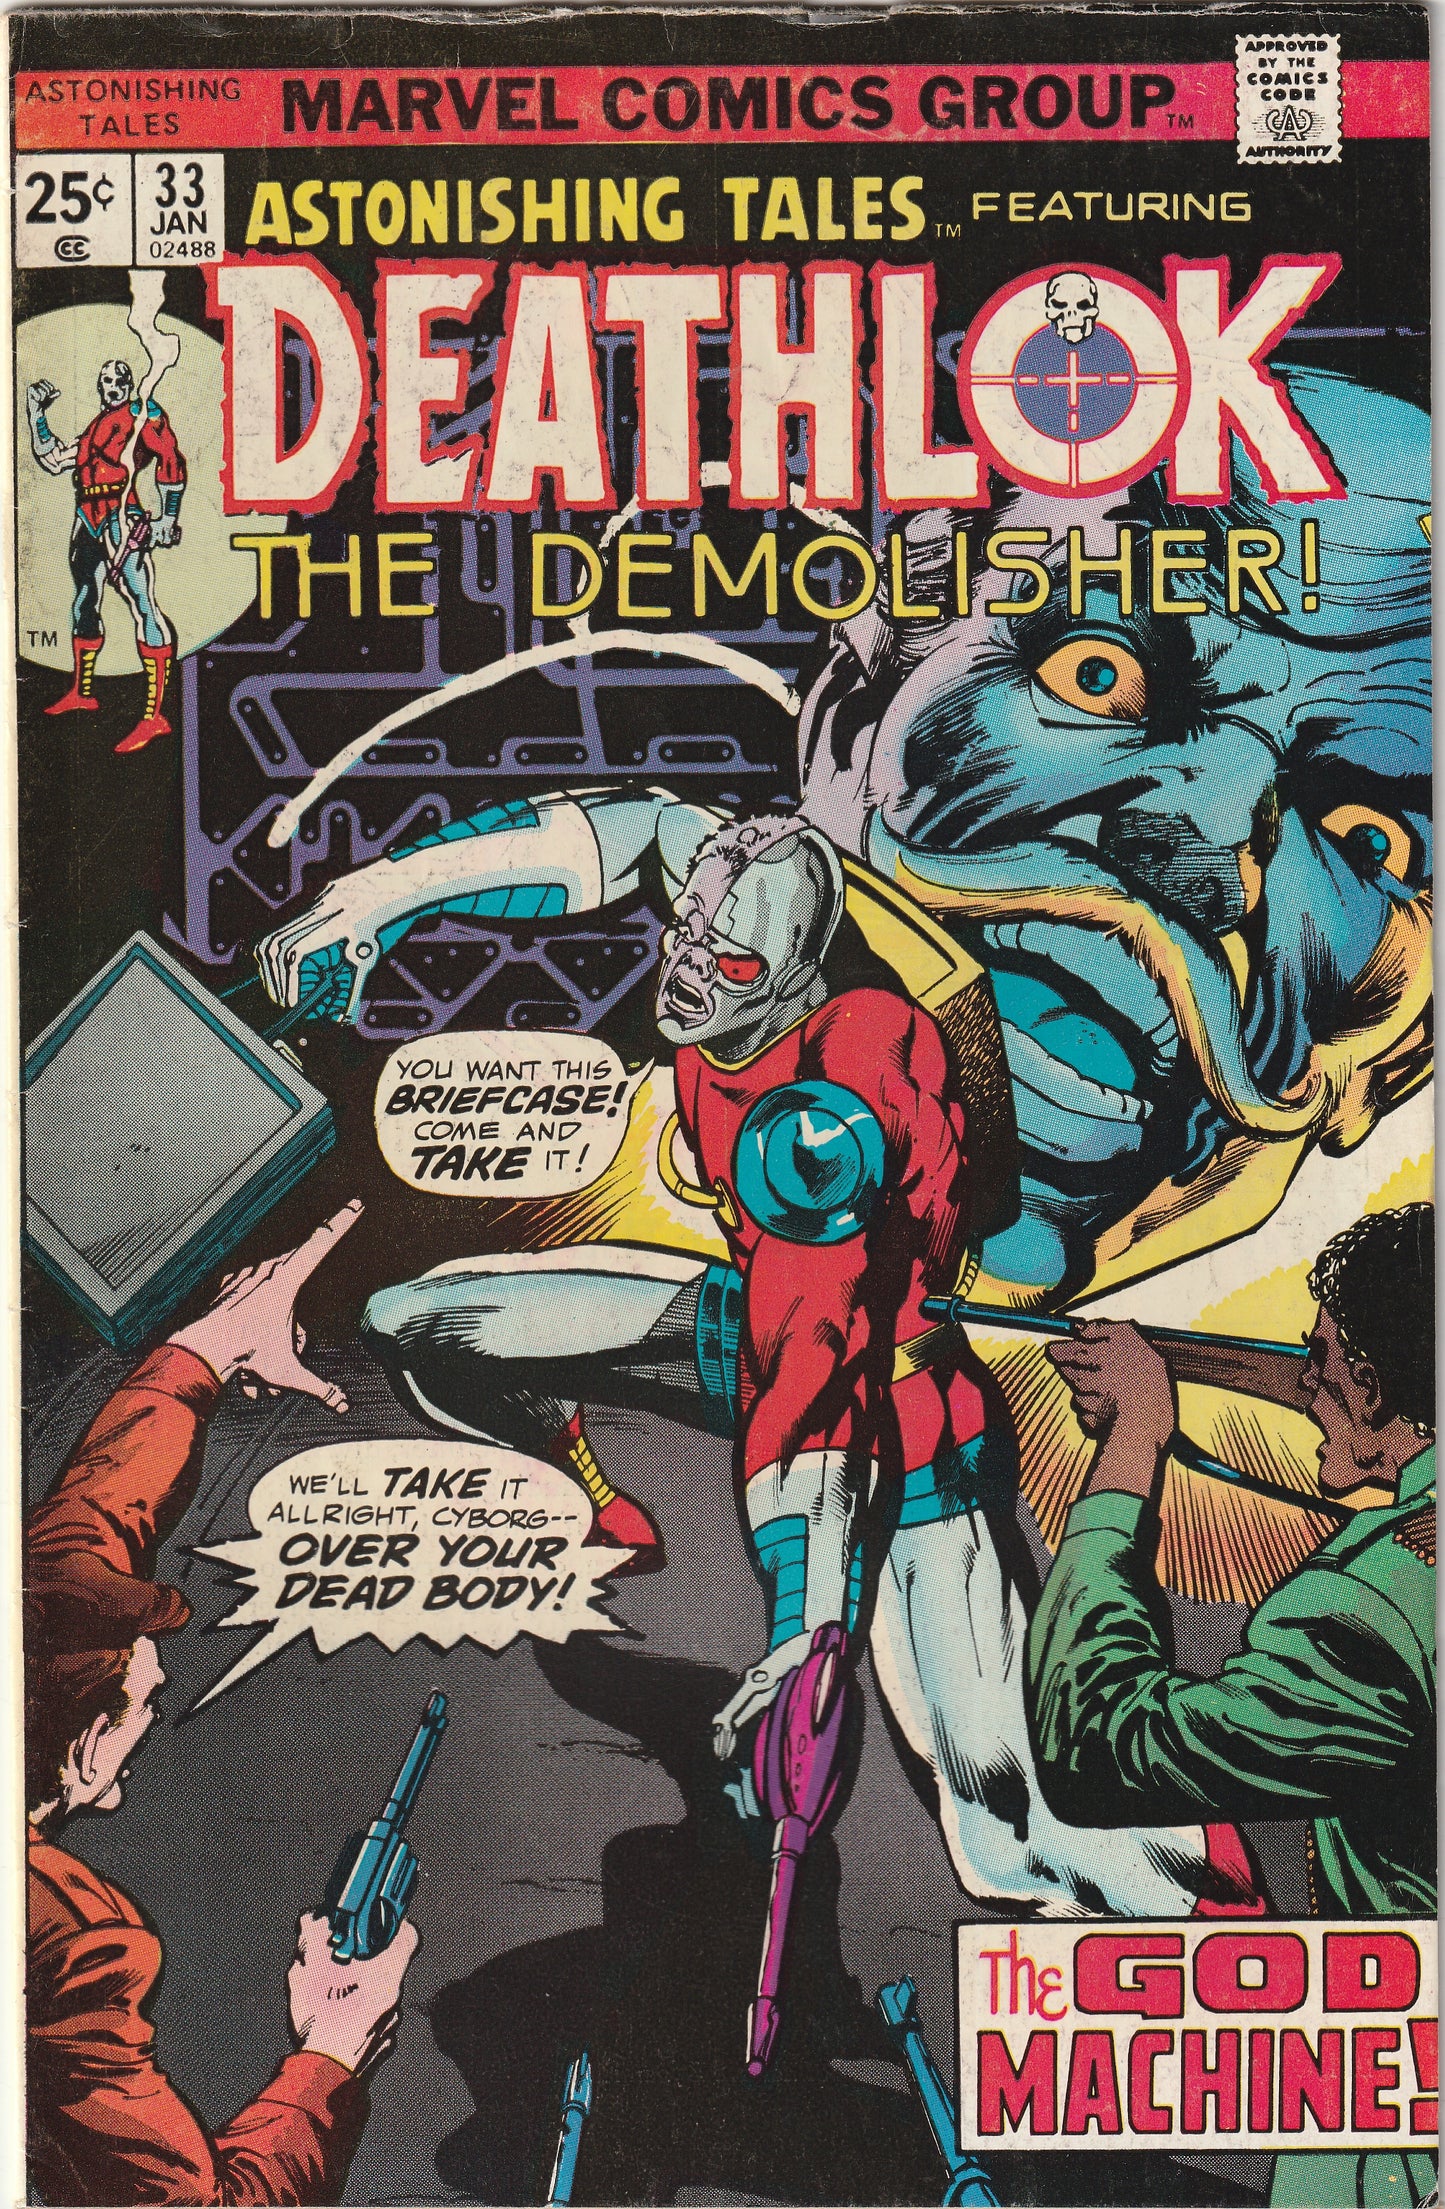 Astonishing Tales #33 (1976) Featuring Deathlok the Demolisher - 1st Appearance of Hellinger